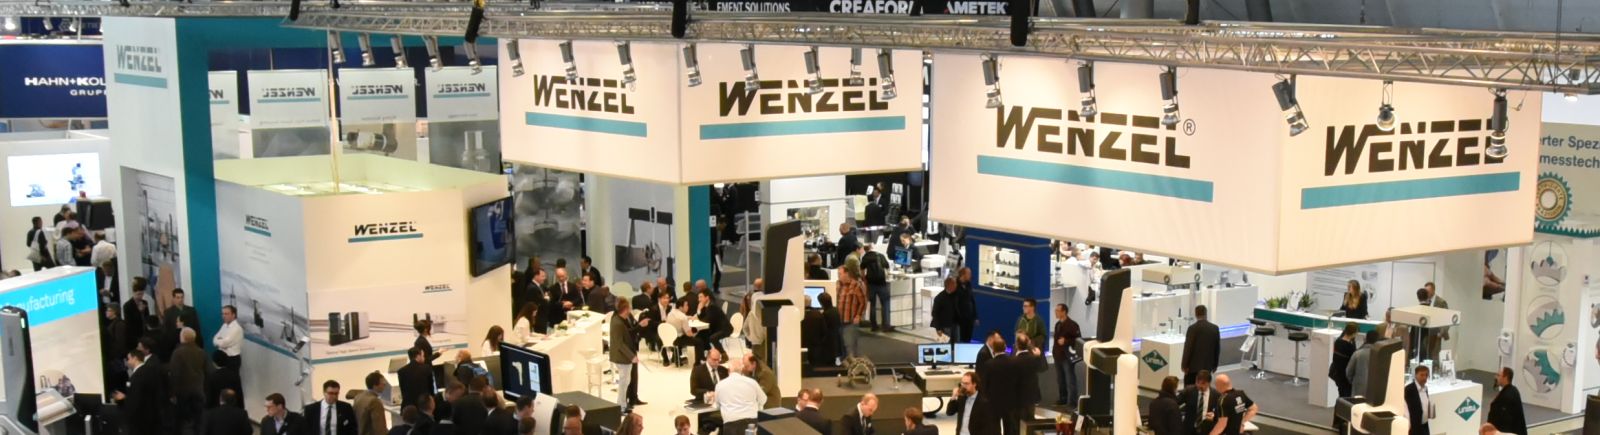 Wenzel trade show booth